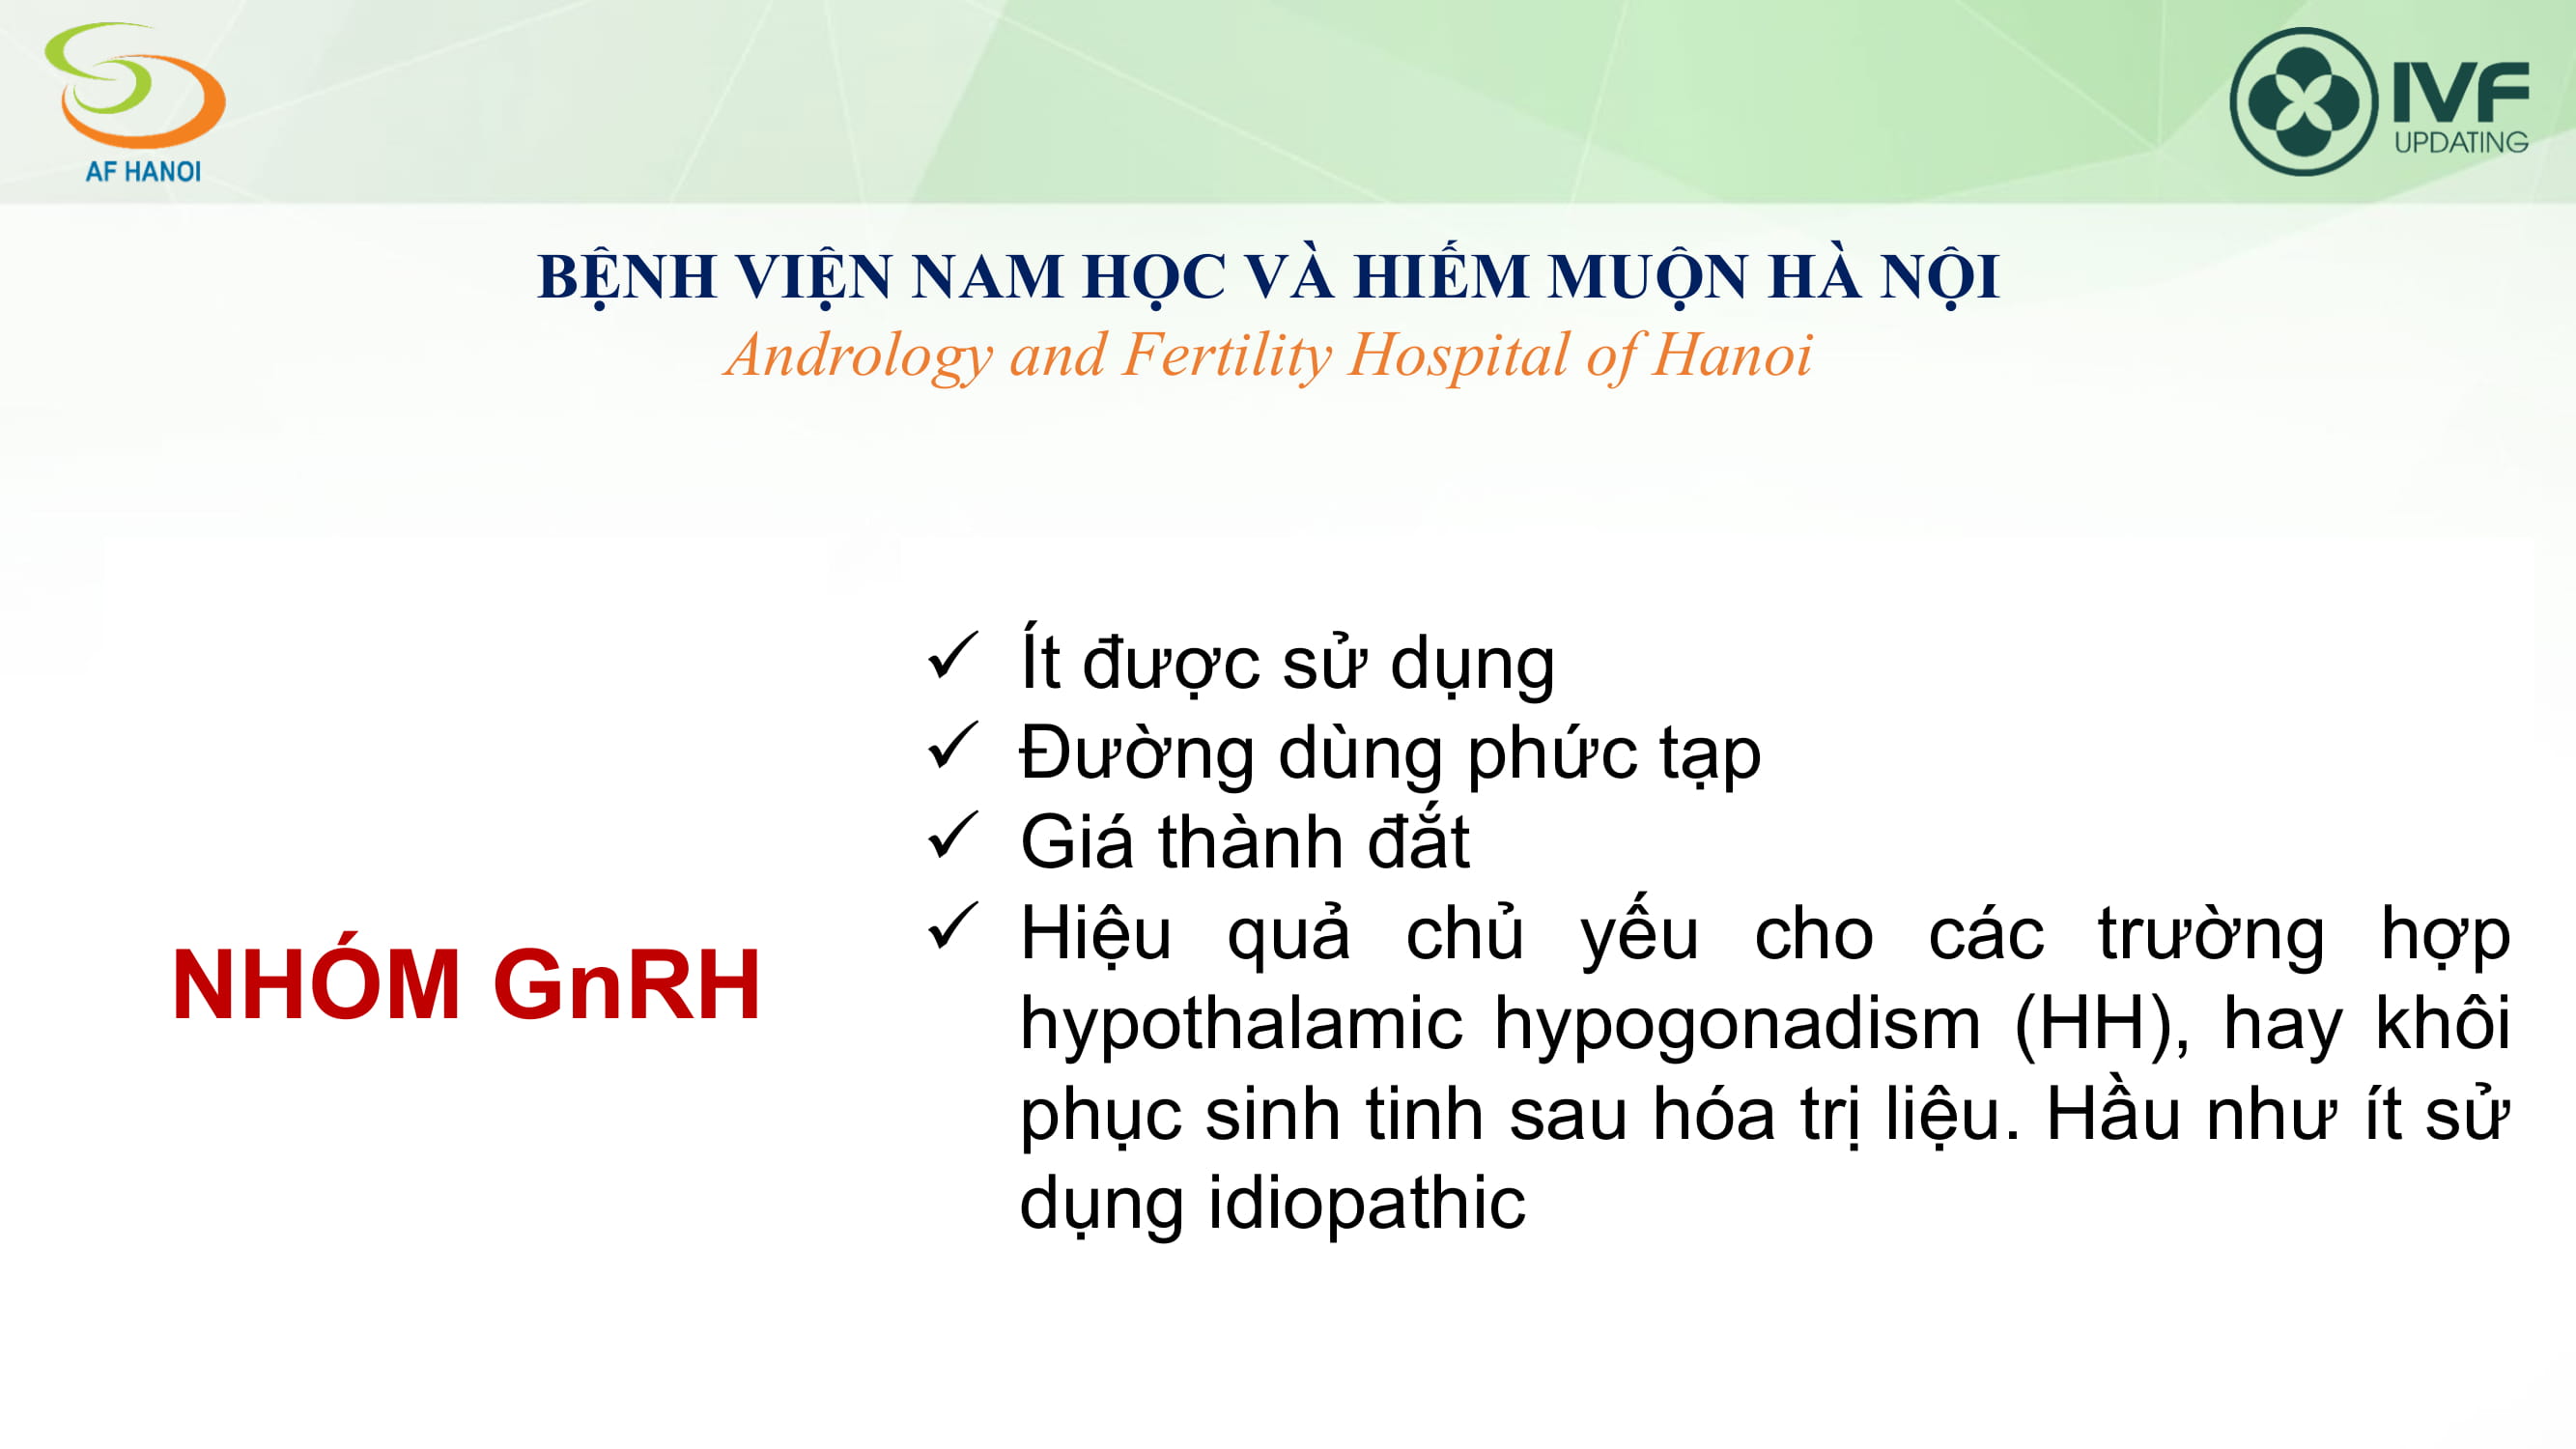 BS Nguyen Ba Hung - Chi dinh thuoc kich thich sinh tinh1-22